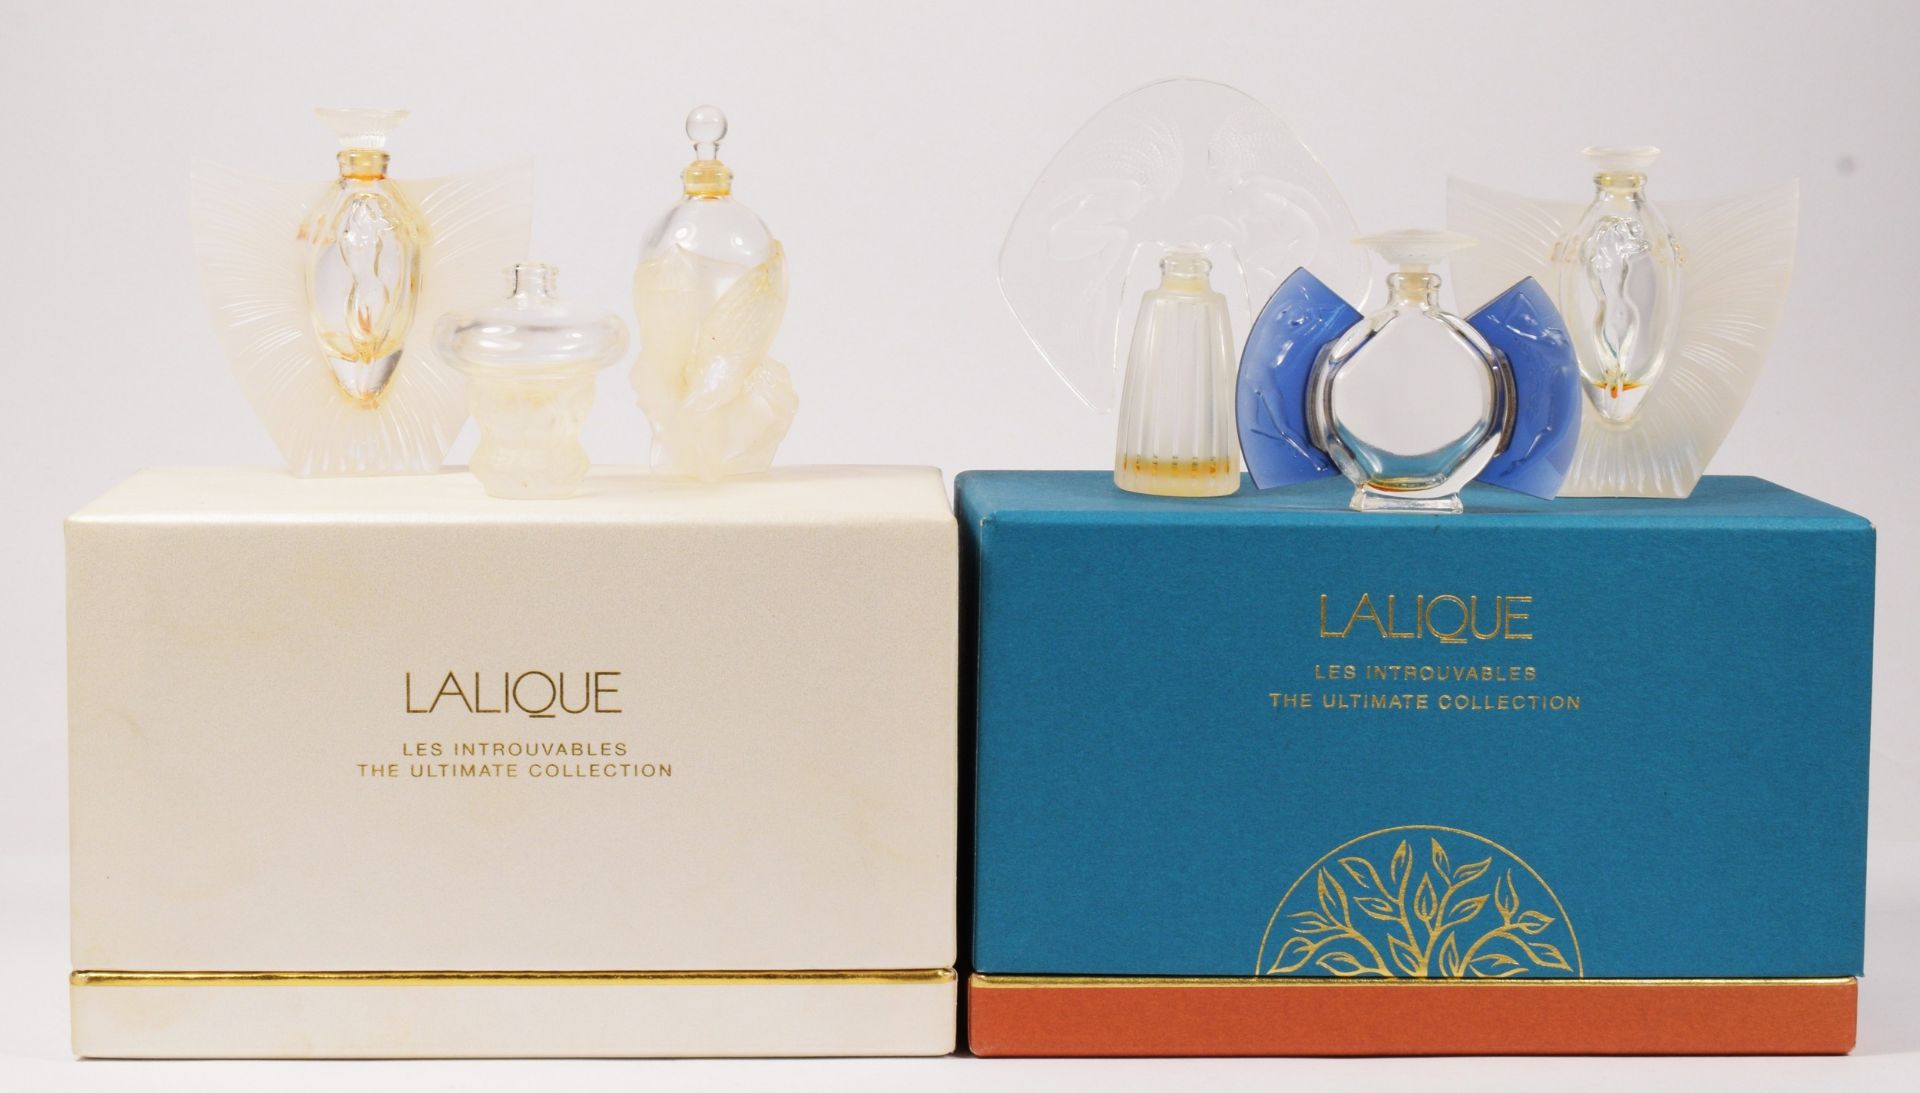 Lalique "Les Flacons Miniatures", perfume bottles, 1998, 1999, 2000 edition, cased with display card - Image 8 of 9